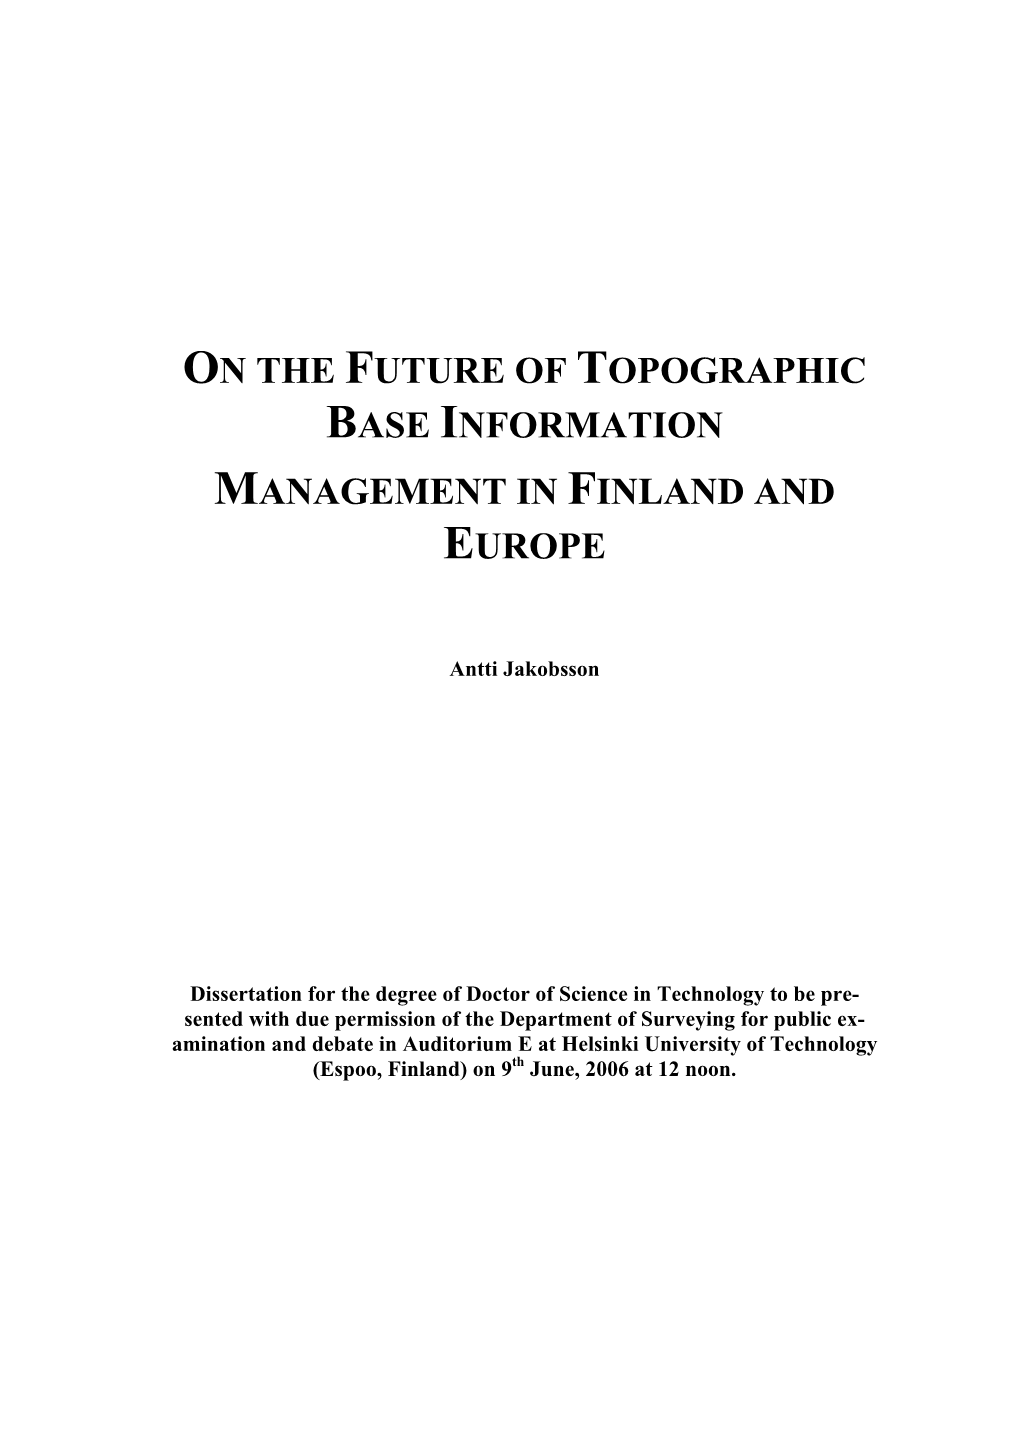 On the Future of Topographic Base Information Management in Finland and Europe